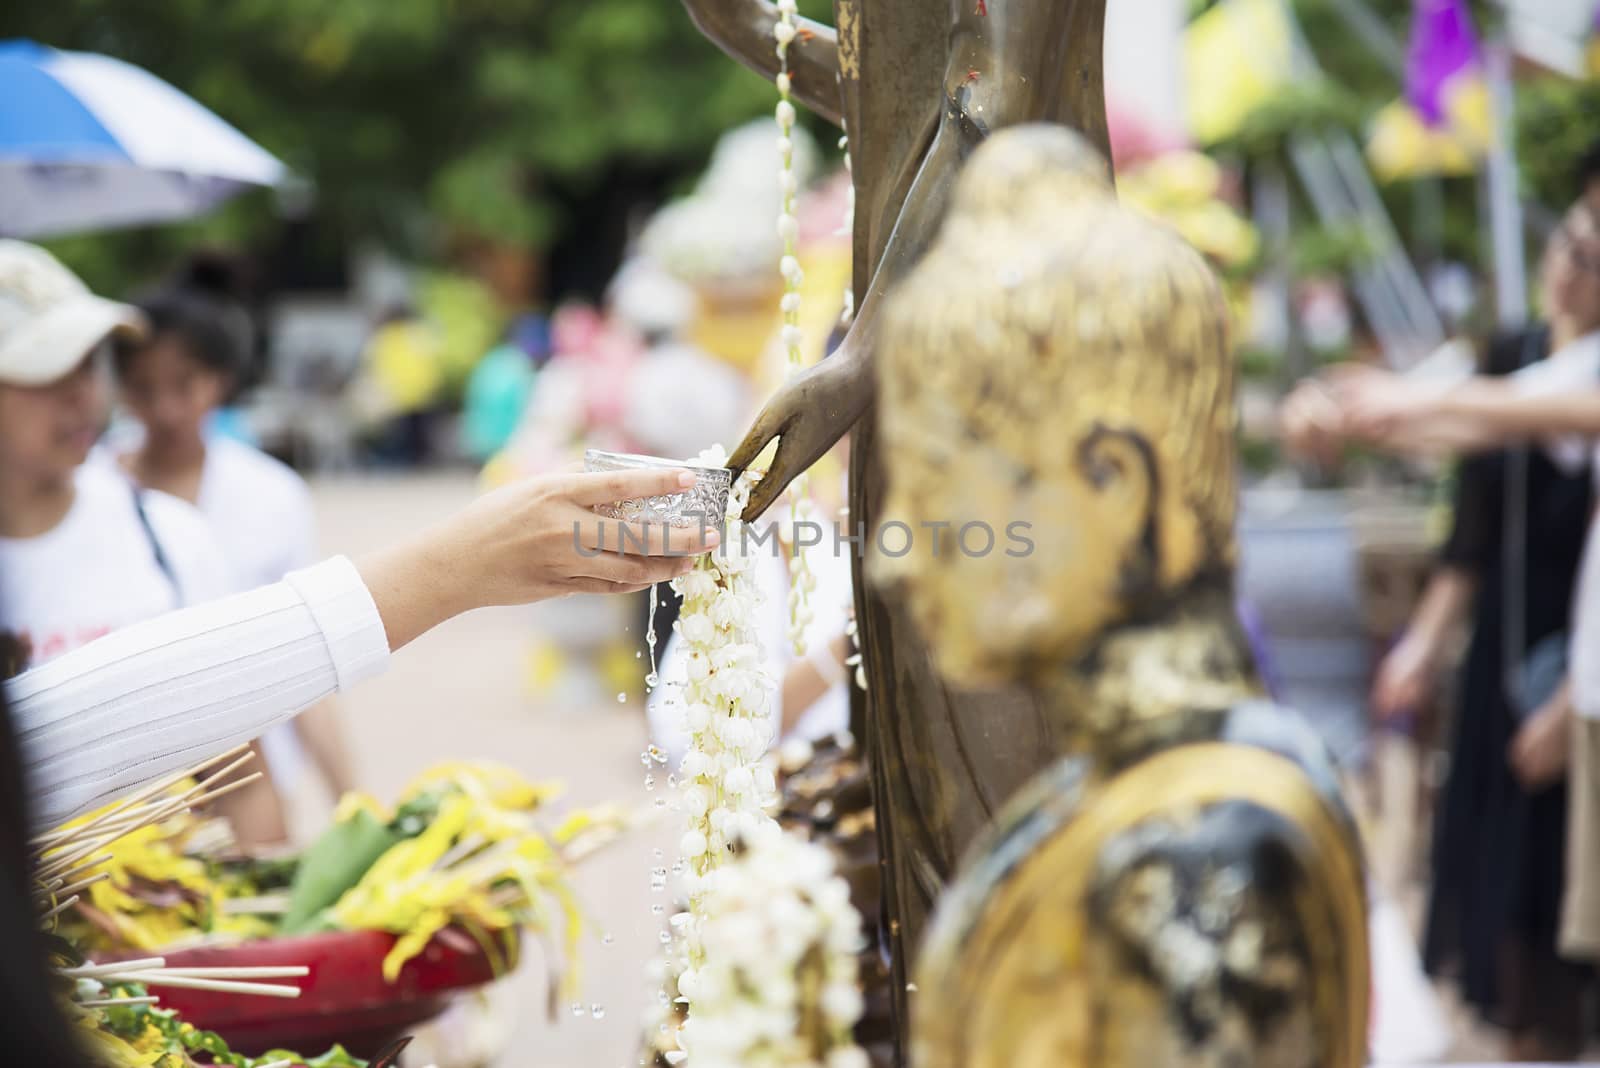 People pouring water onto a Buddha image this is a gesture of worship - people participate the local annual Chiang Mai traditional Bhudist festival.